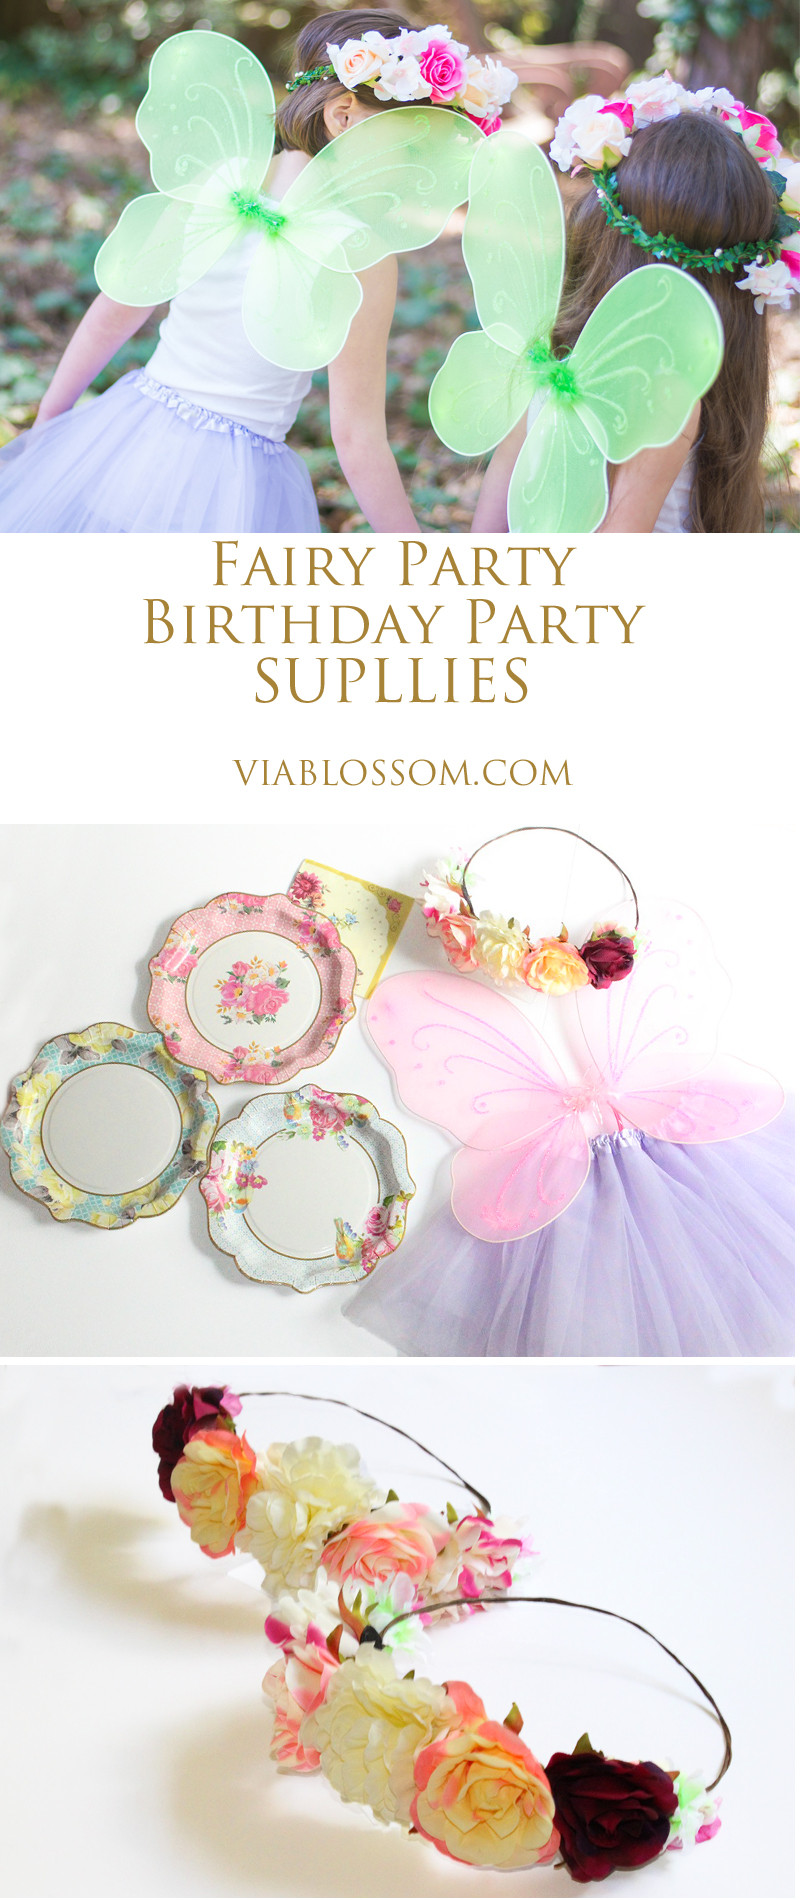 Fairy Birthday Party Decorations
 Must Have Fairy Party Supplies Via Blossom